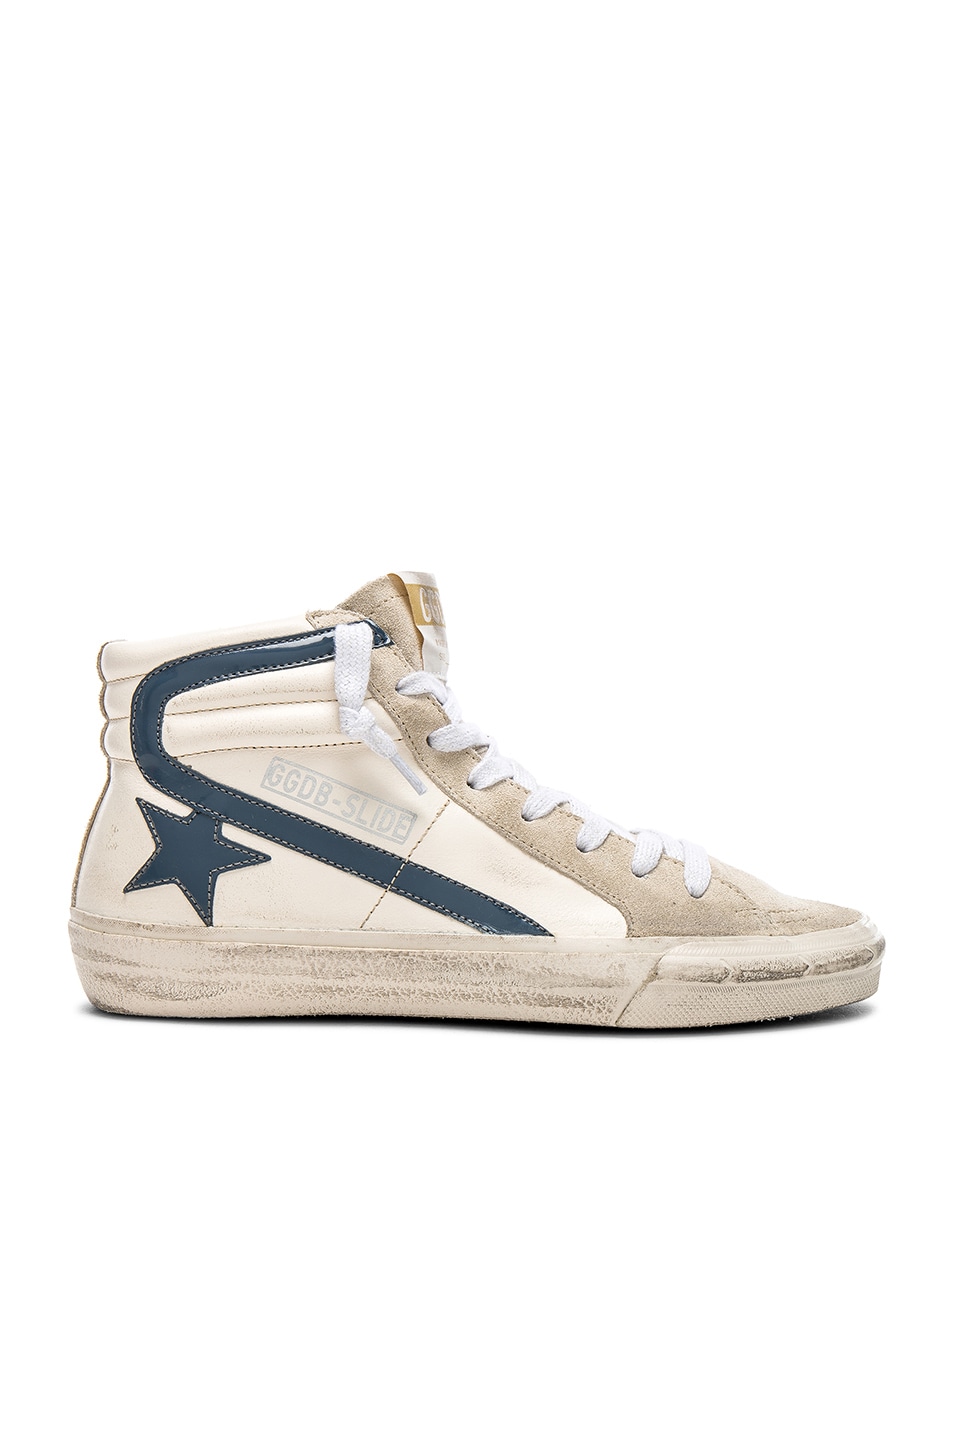 Image 1 of Golden Goose Leather Slide Sneakers in Cream & Grey Patent Star